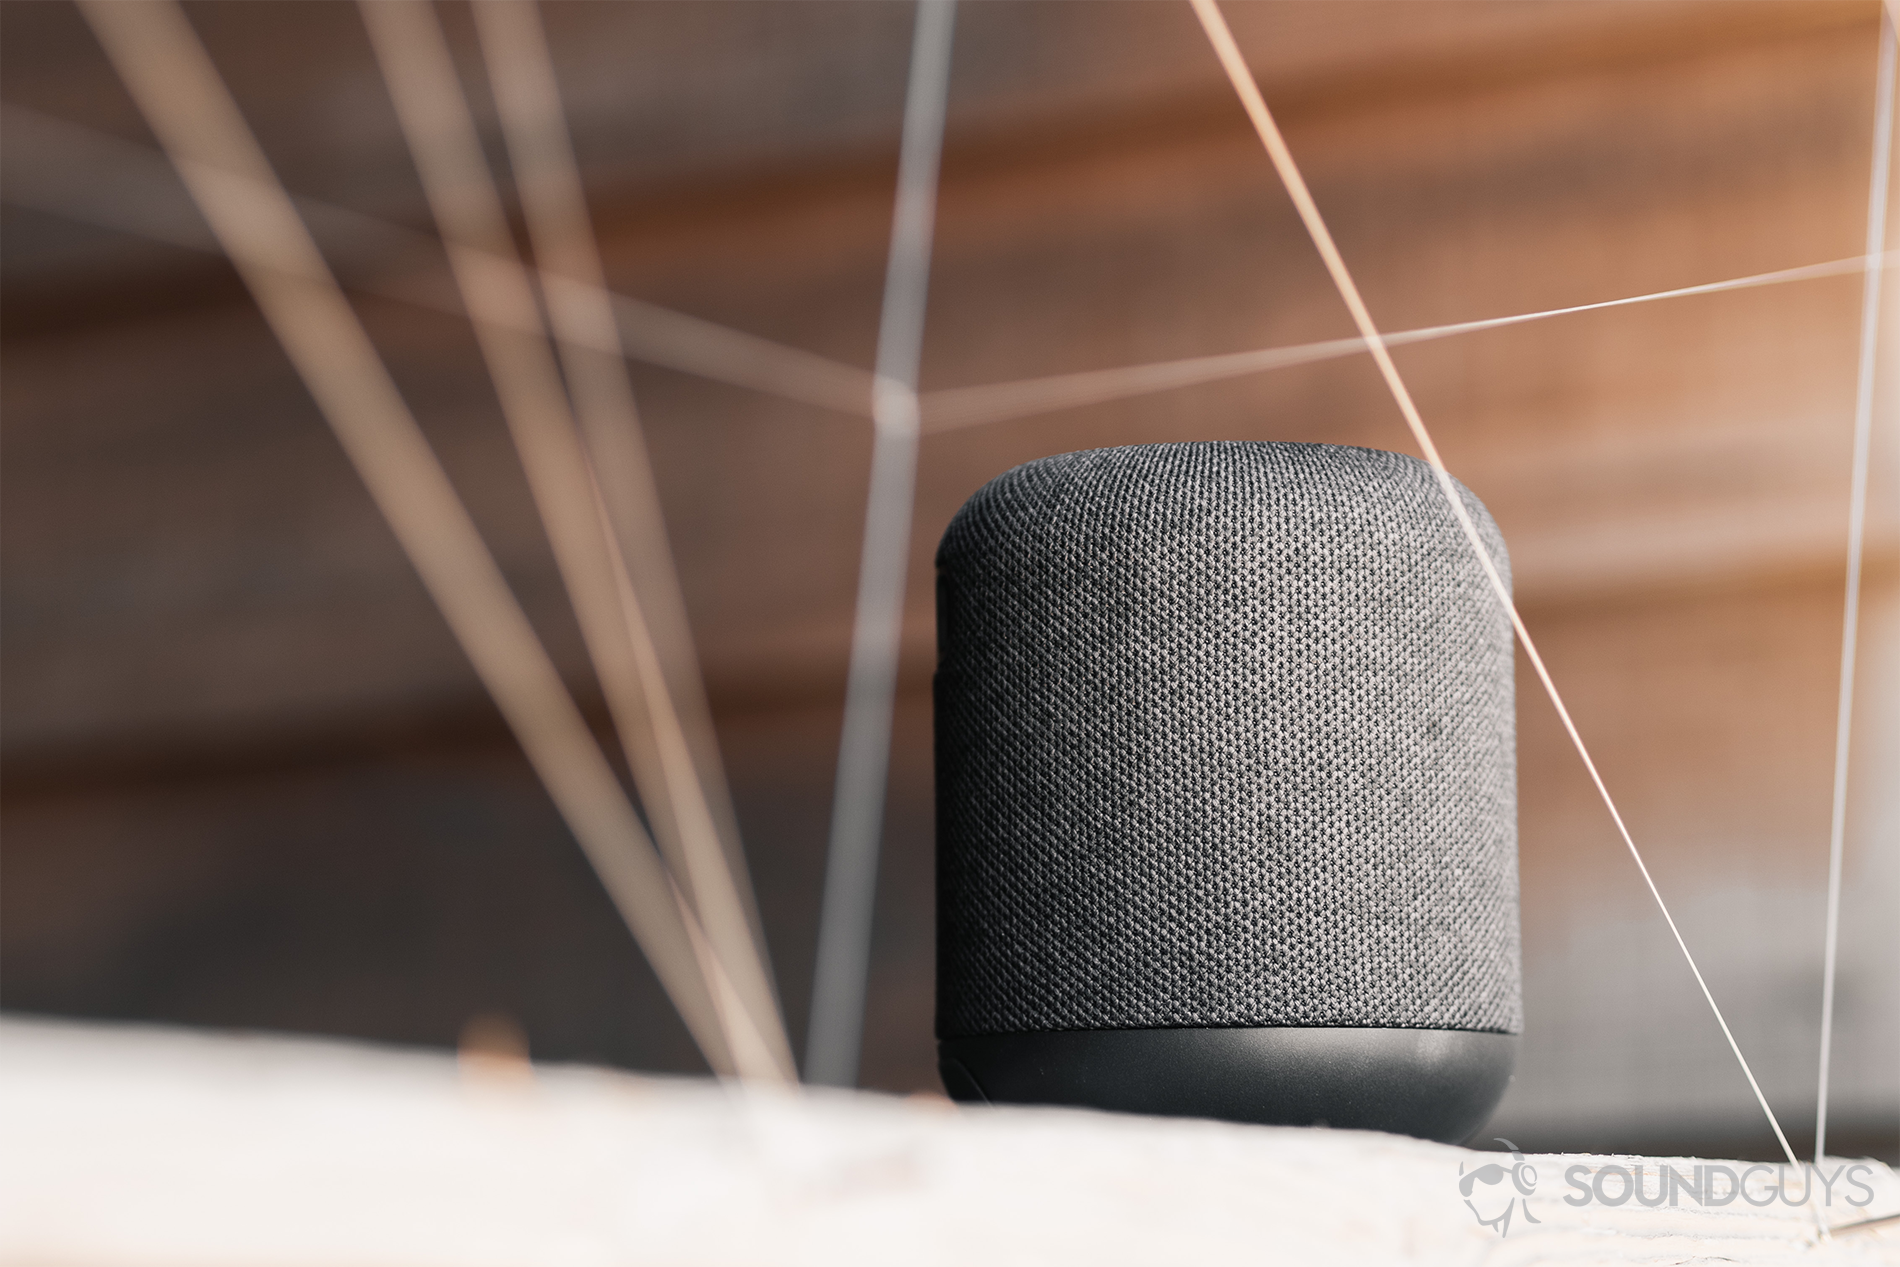 Anker Soundcore Motion Q review: An image of the speaker on a wood surface, against a horizontally paneled (wood) background.